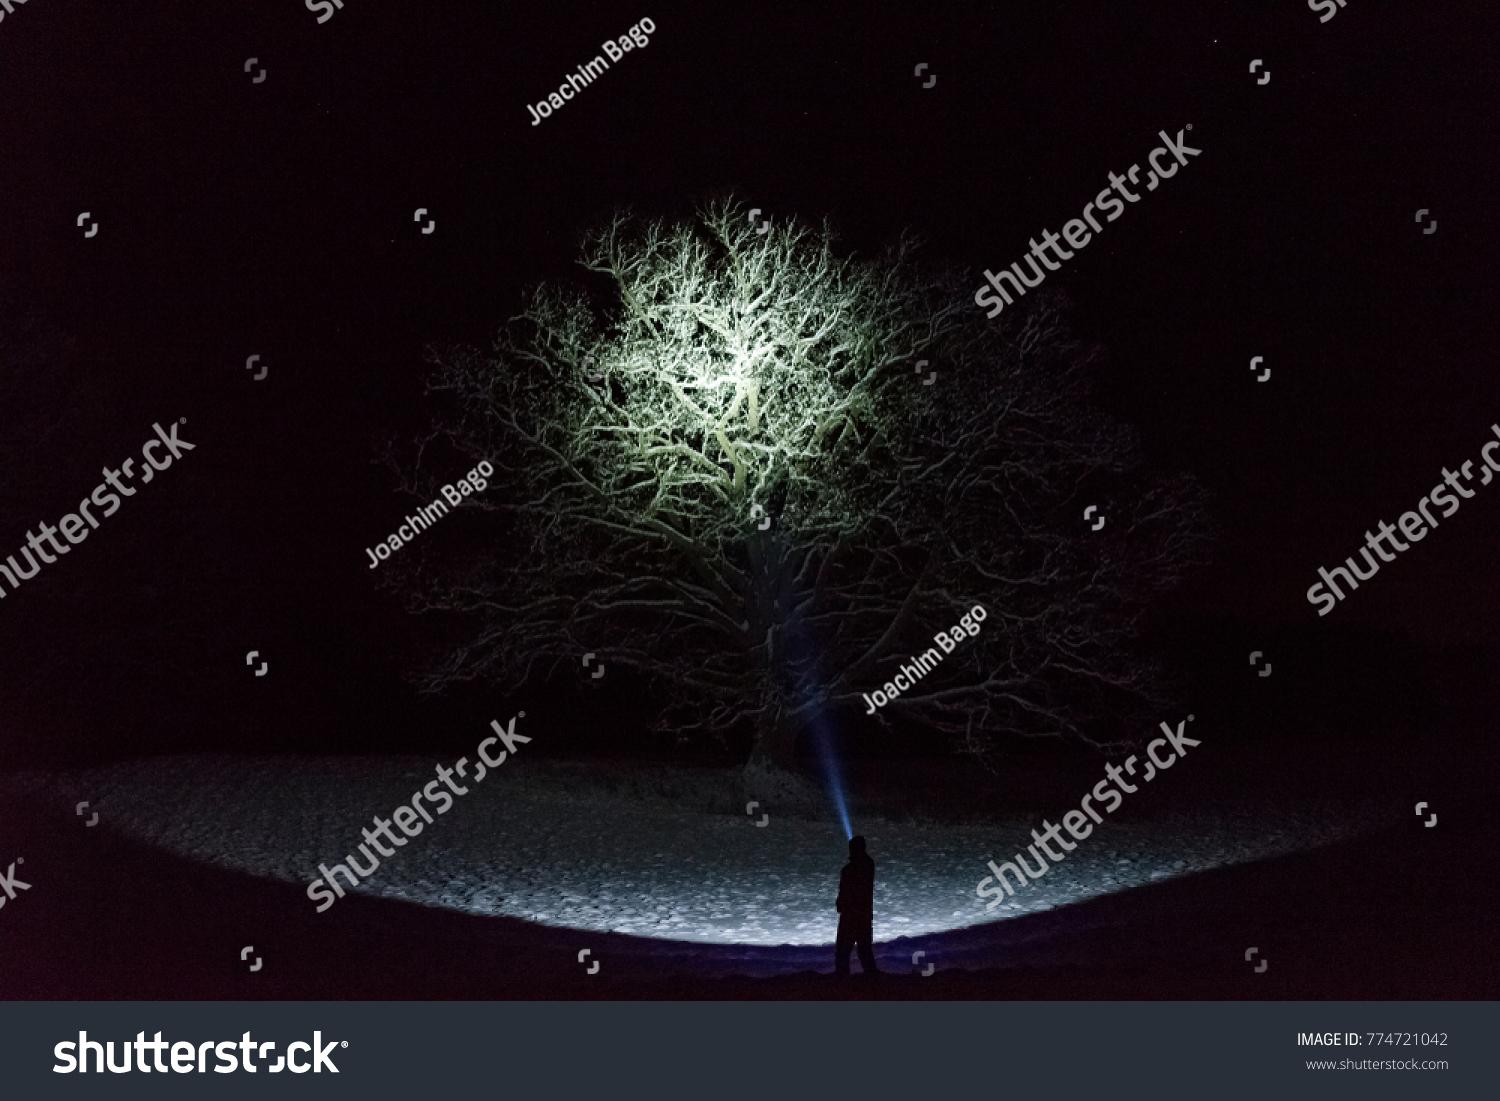 Man standing outdoors at night in Sweden Scandinavia winter landscape shining with flashlight at sky. Nice blue light beam. Beautiful, calm and peaceful abstract image. #774721042